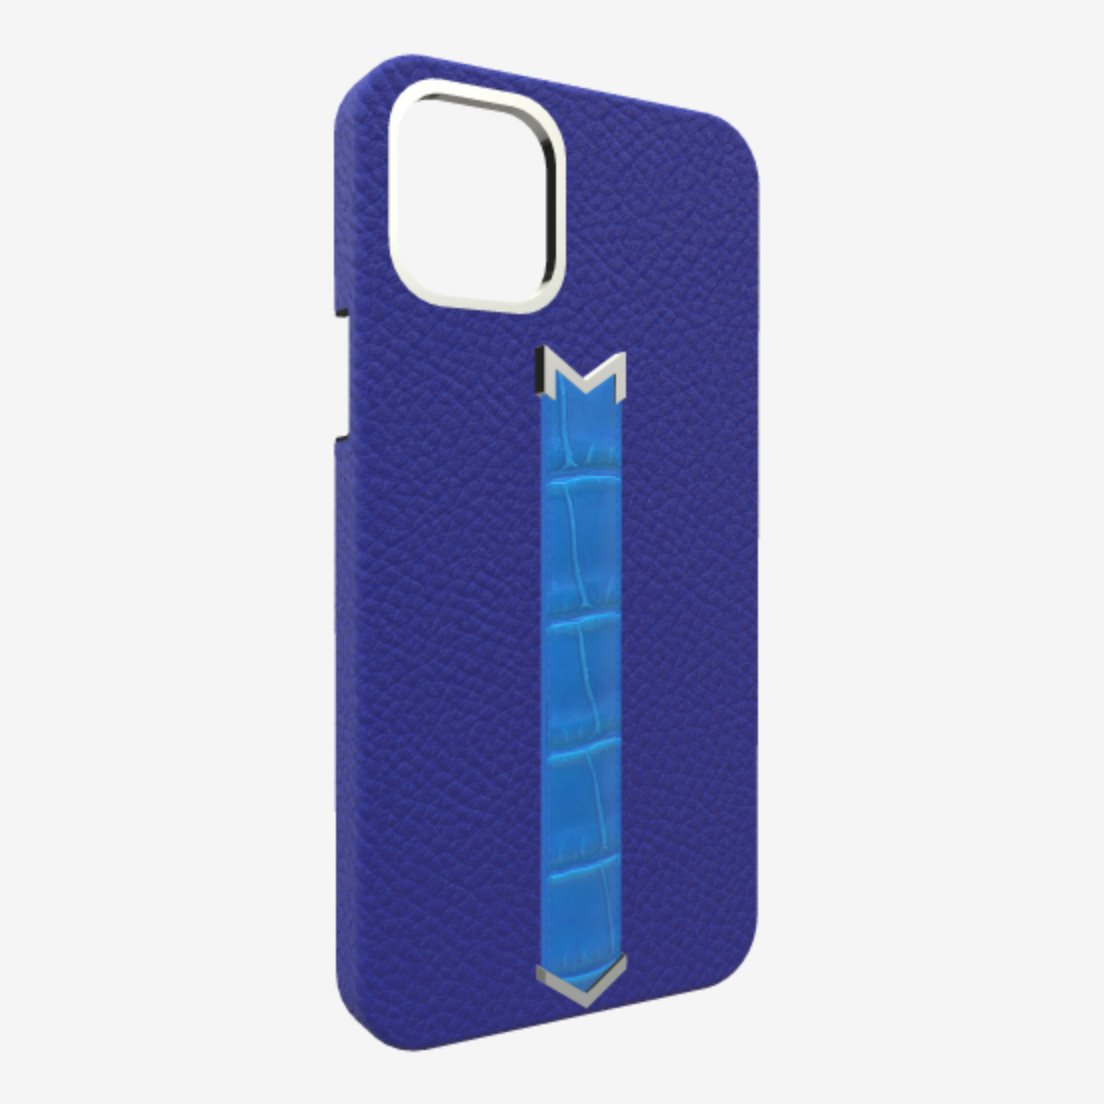 Silver Finger Strap Case for iPhone 13 Pro Max in Genuine Calfskin and Alligator Electric-Blue Royal-Blue 